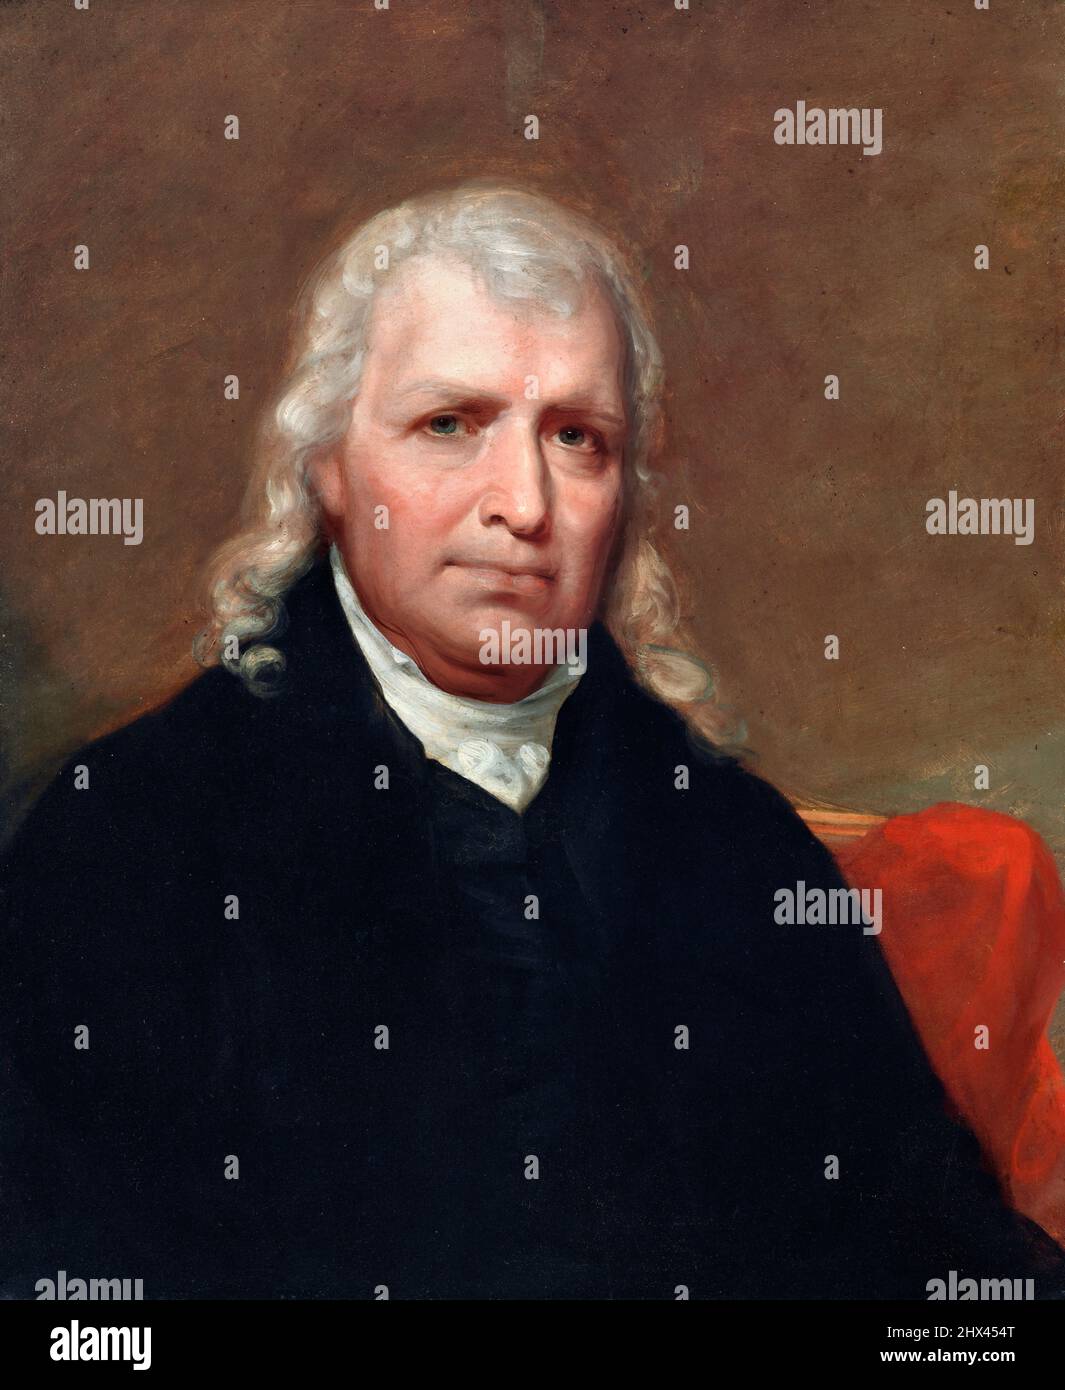 Portrait of  the Supreme Court Justice and United States Founding Father, Samuel Chase (1741-1811) by John Wesley Jarvis, oil on wood, 1811 Stock Photo